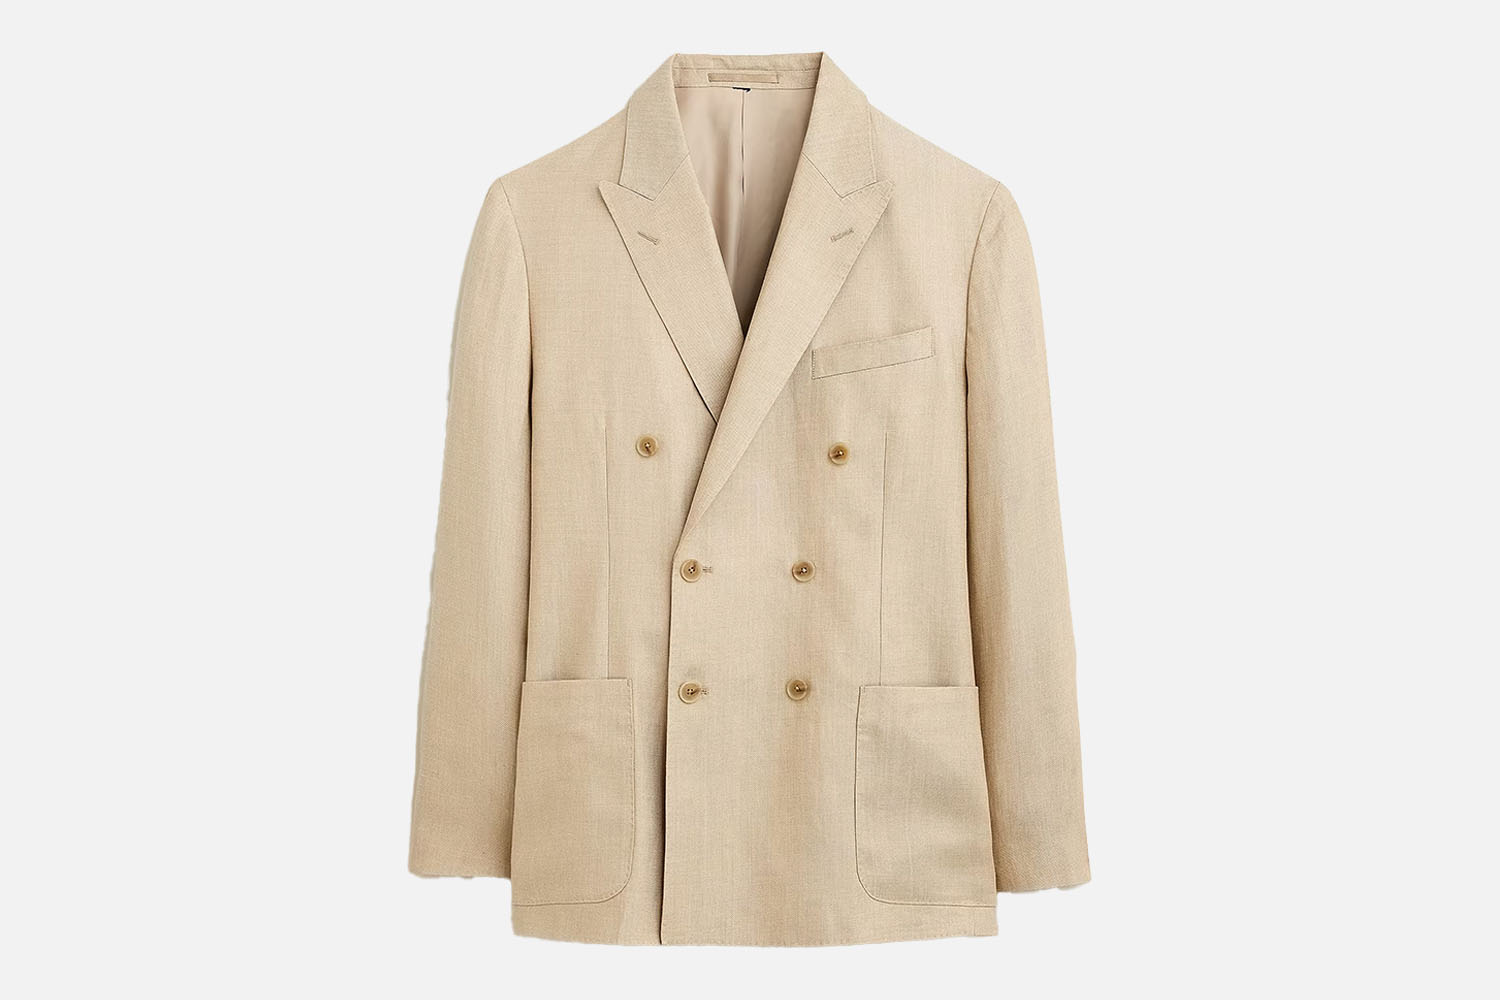 J.Crew Crosby Classic-Fit Double-Breasted Unstructured Suit Jacket